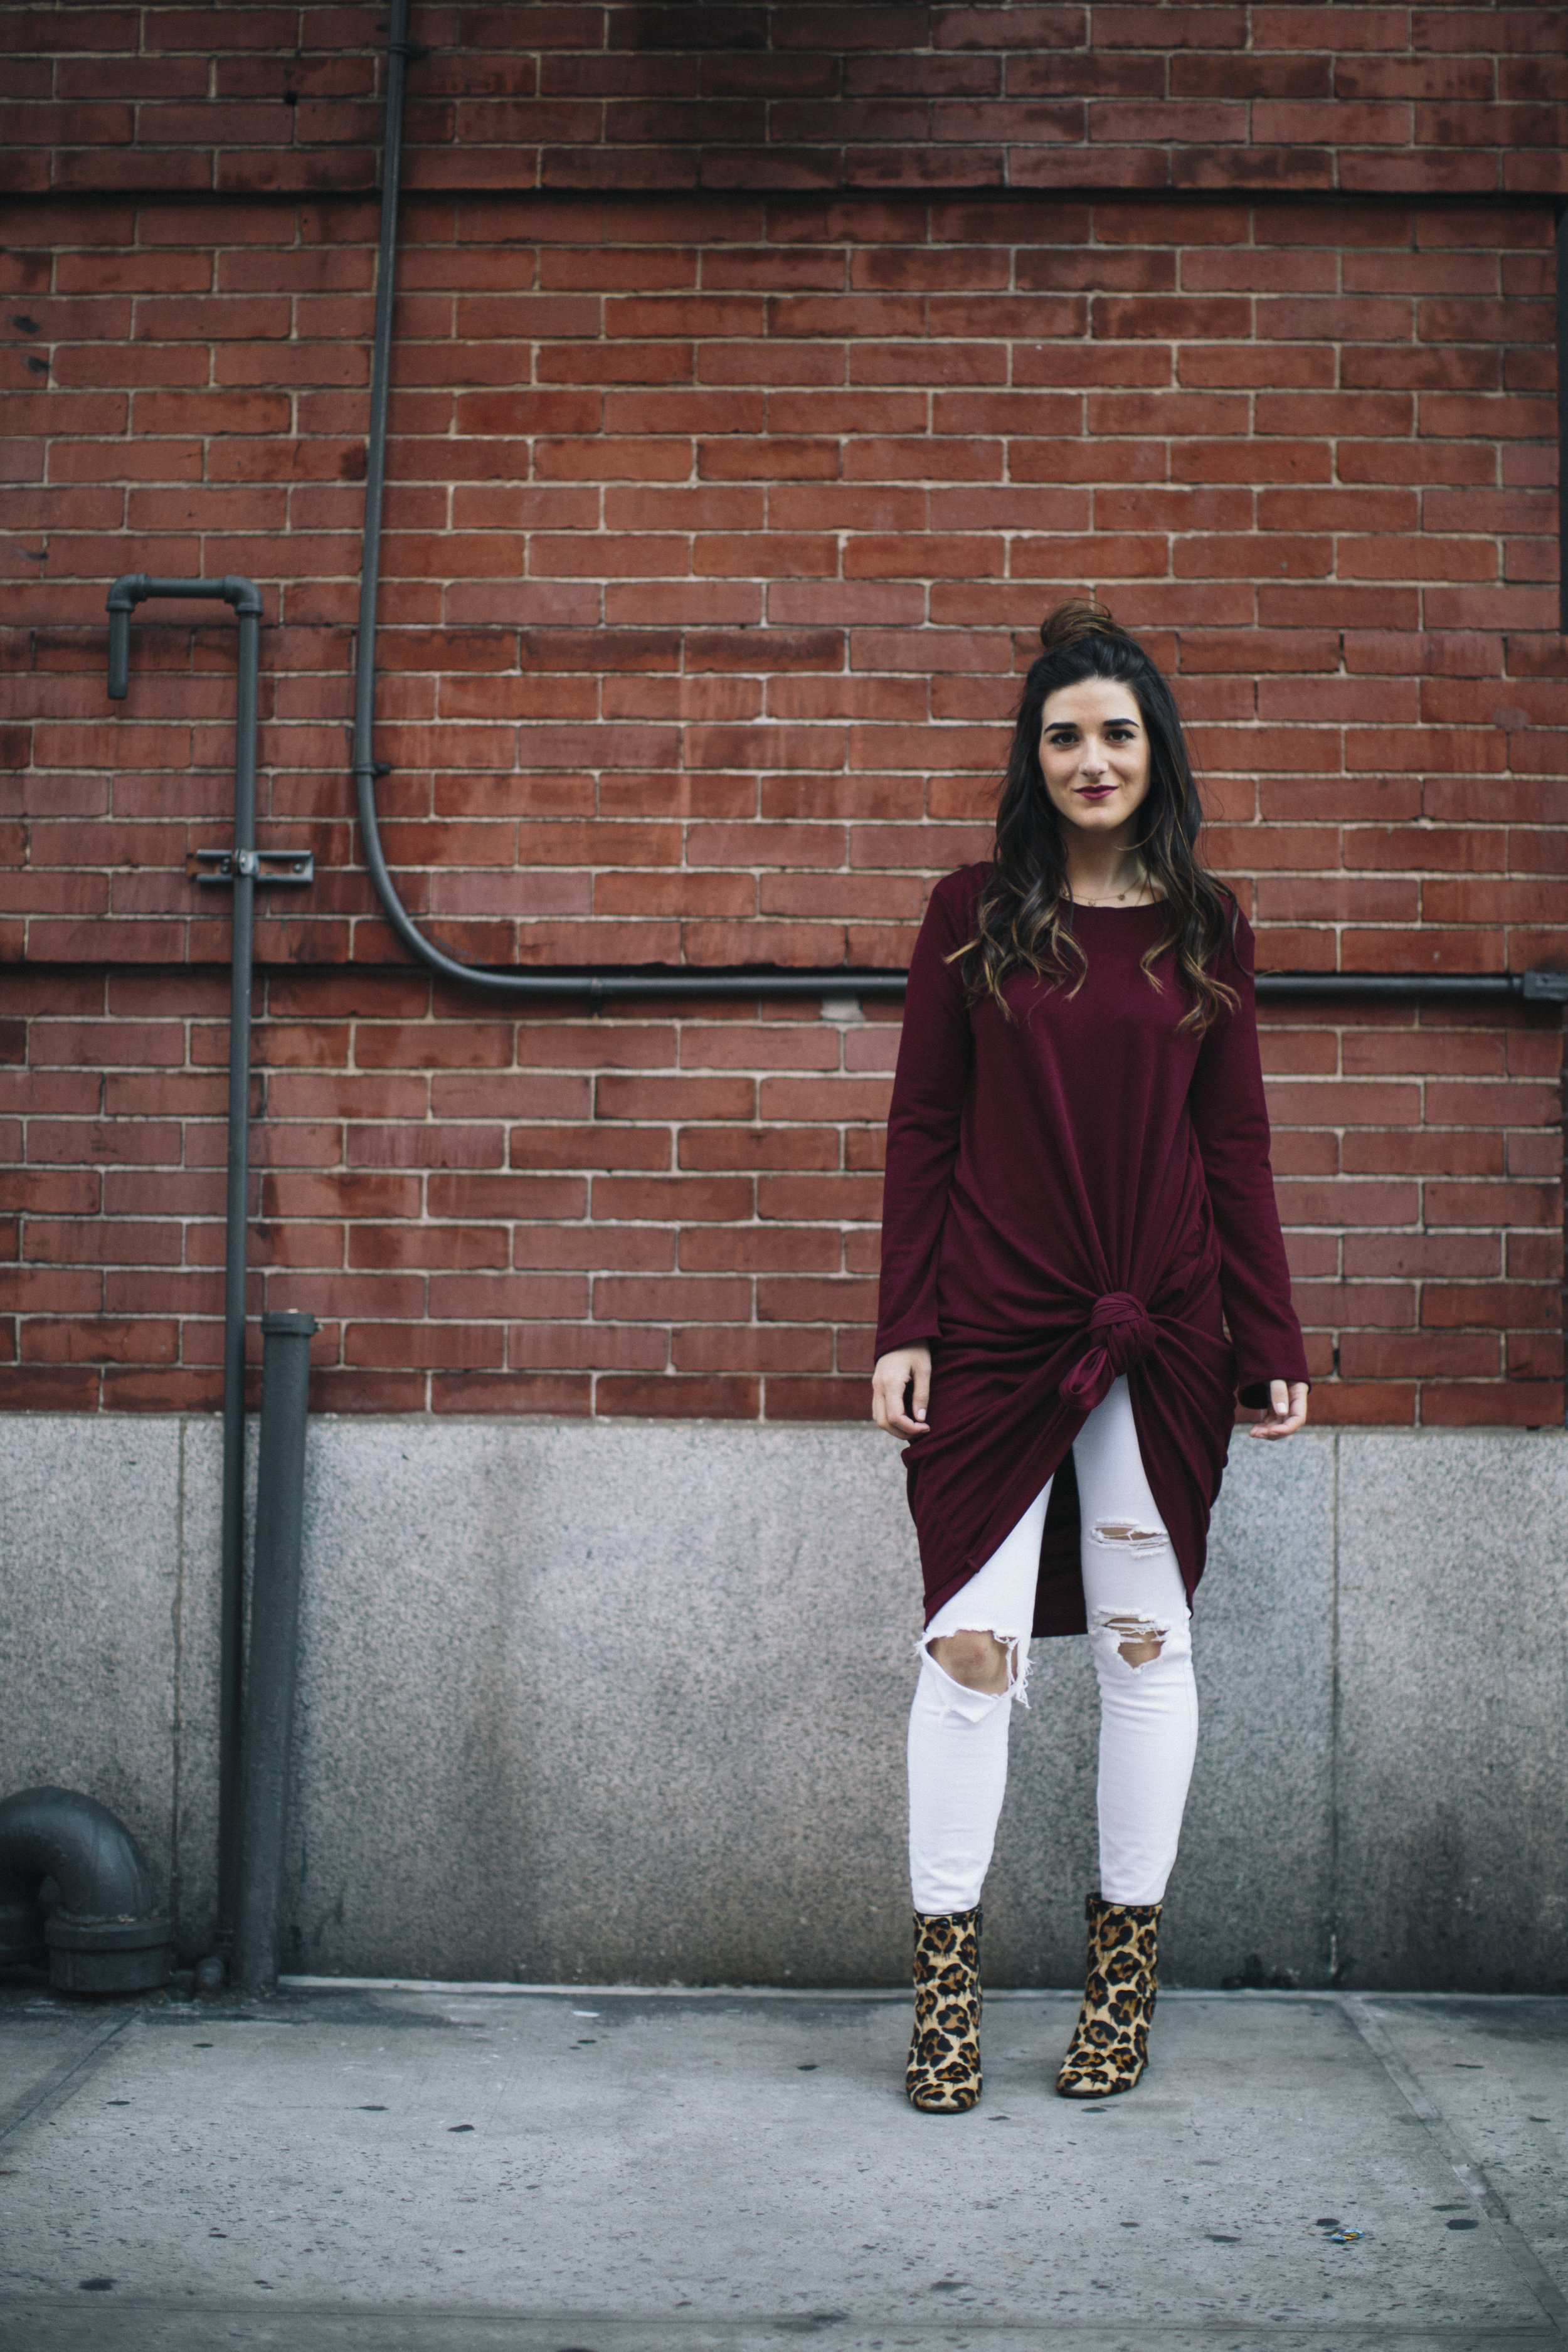 Knotted Dress + Ripped White Jeans 4 Ways To Build Connections Louboutins & Love Fashion Blog Esther Santer NYC Street Style Blogger Outfit OOTD Trendy Red Maroon Burgundy Winter Wear Color Leopard Coach Shoes Booties Pants Girl Women Topknot Bun Hair.jpg